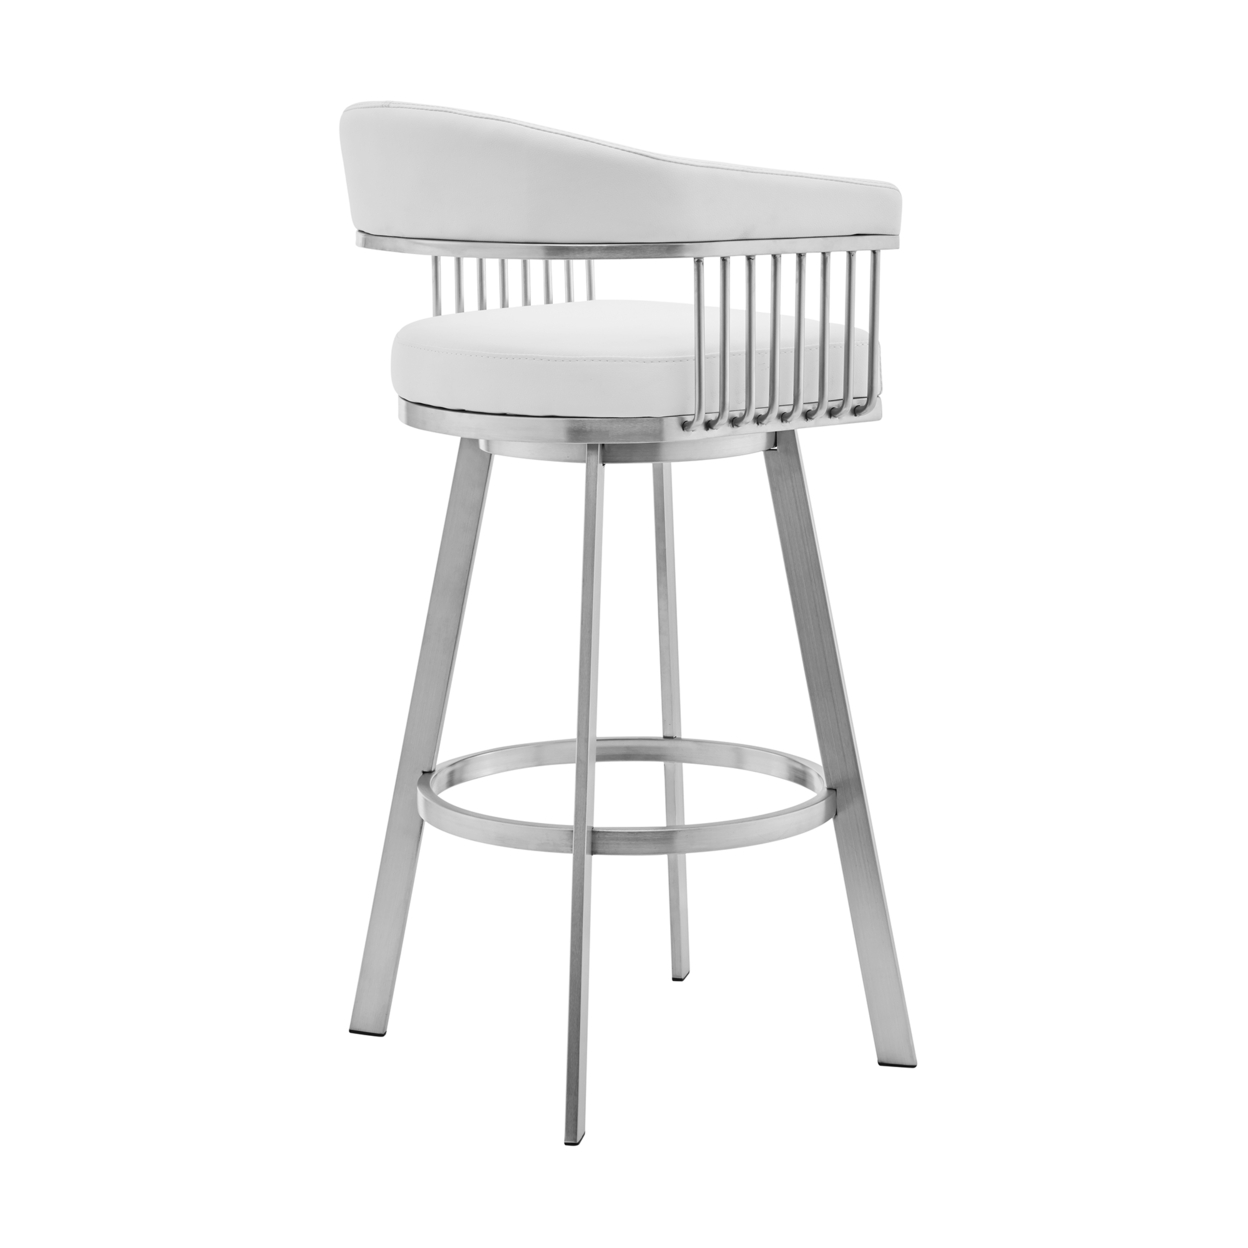 Swivel Barstool With Open Design Metal Frame And Slatted Arms, White And Silver- Saltoro Sherpi